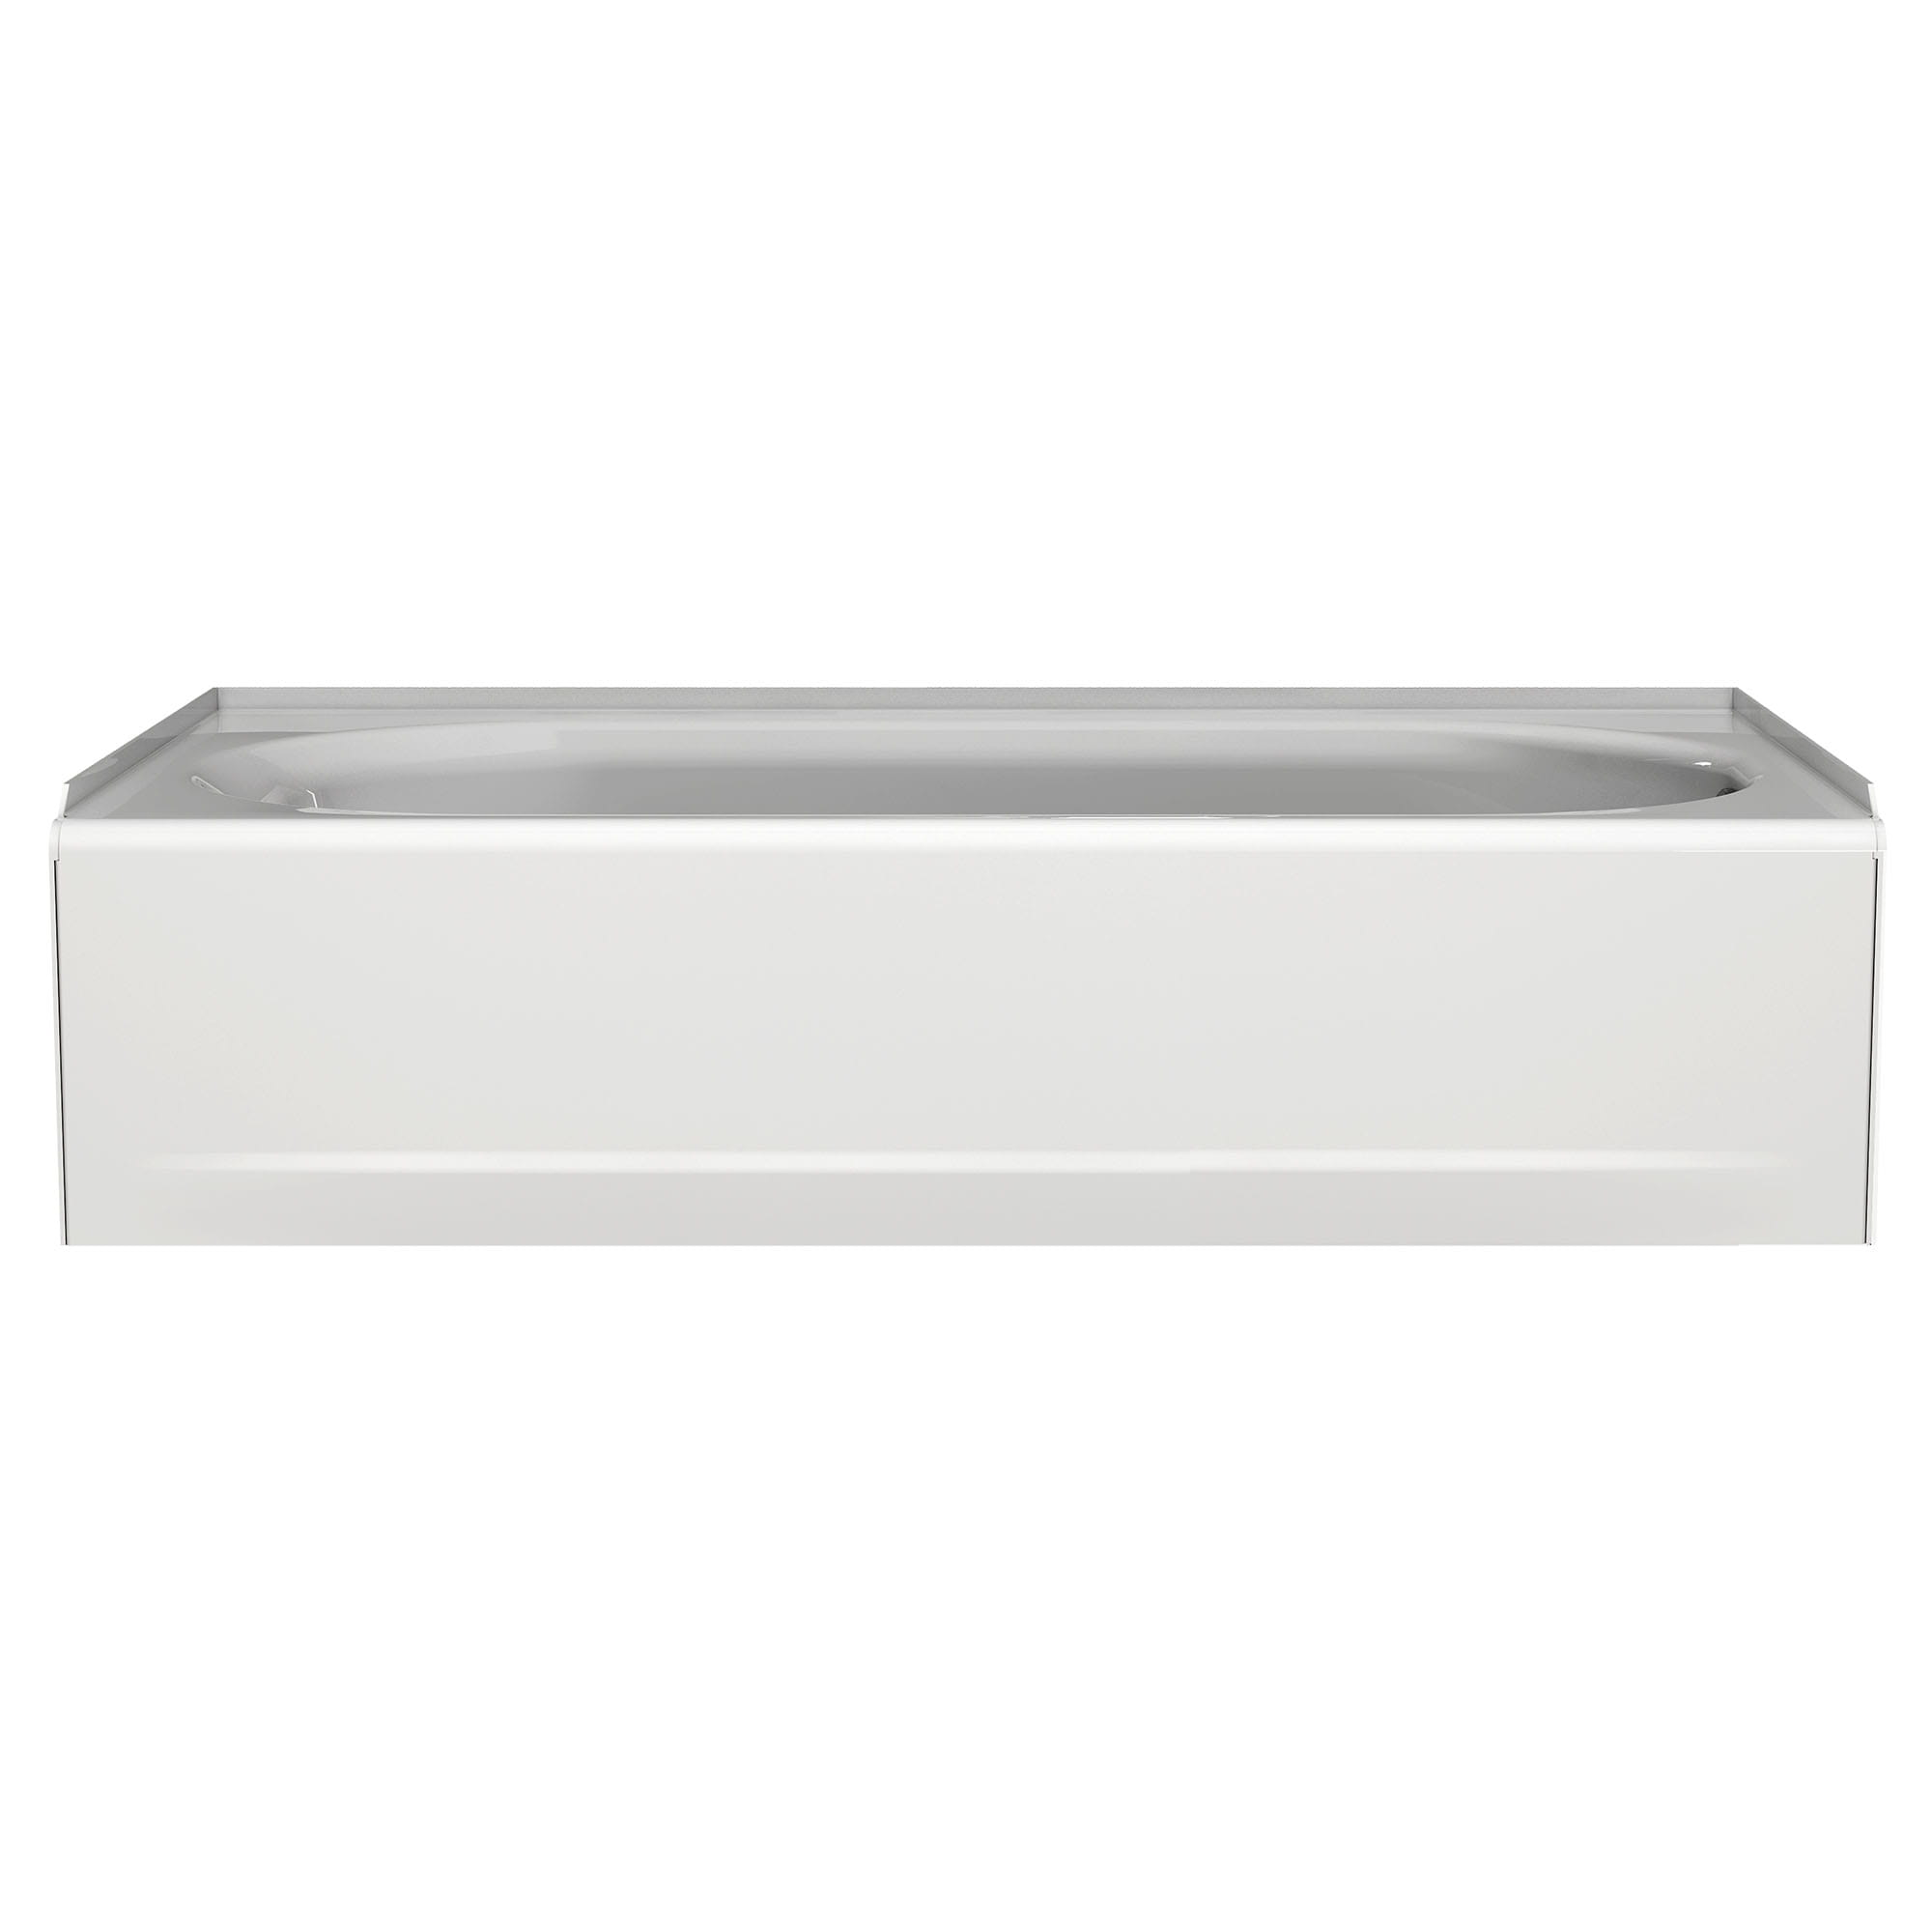 Princeton Americast 60 x 34 Inch Integral Apron Bathtub Above Floor Rough Right Hand Outlet Luxury Ledge with Integral Drain WHITE